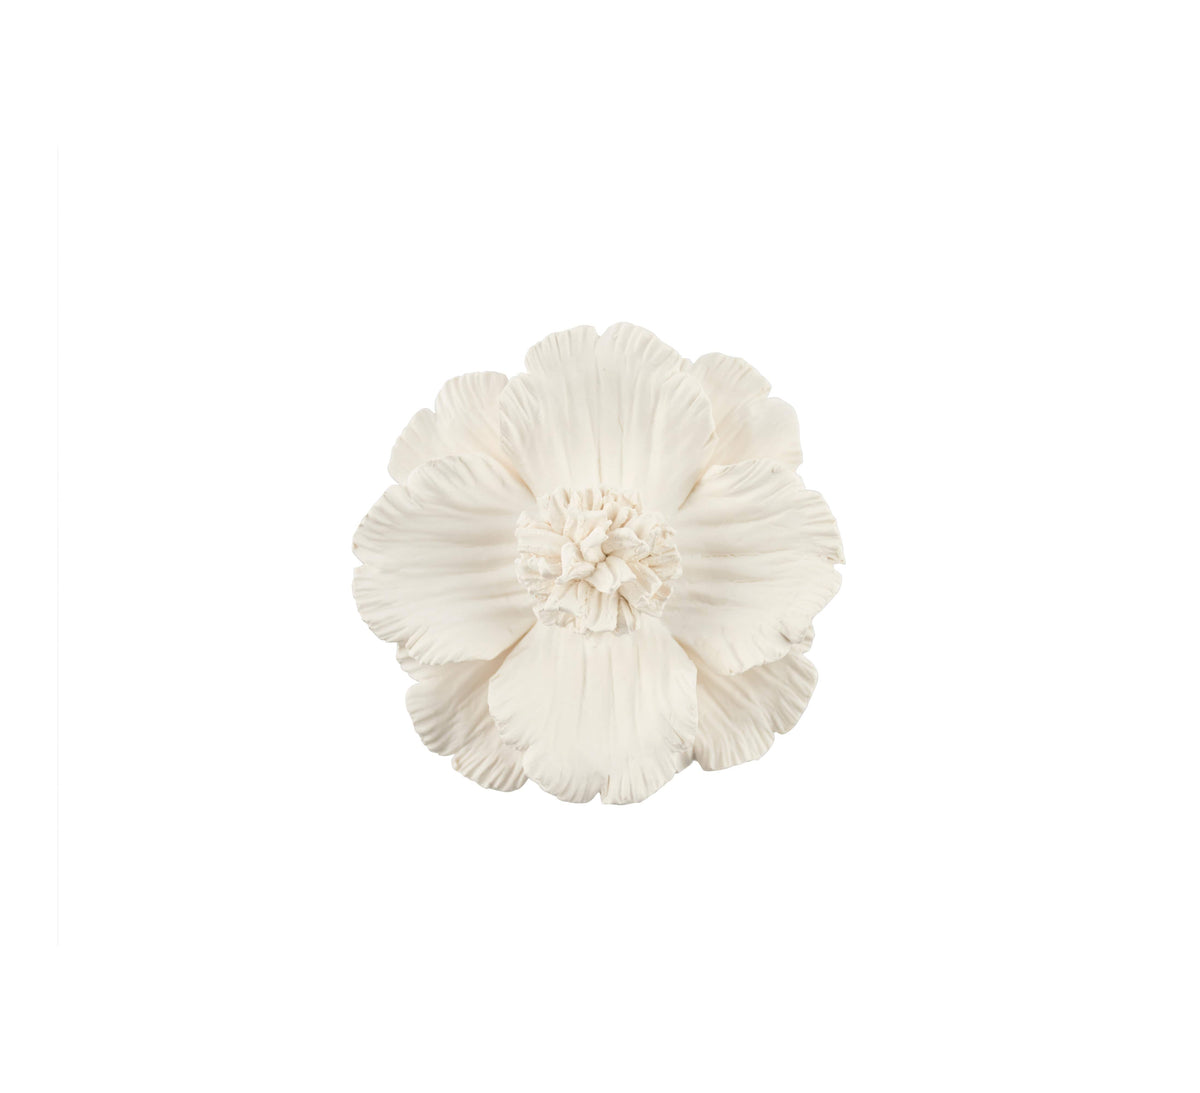 Anemone Flower Scenting Clay Diffuser (Tall Bouquet) - Hysses Singapore